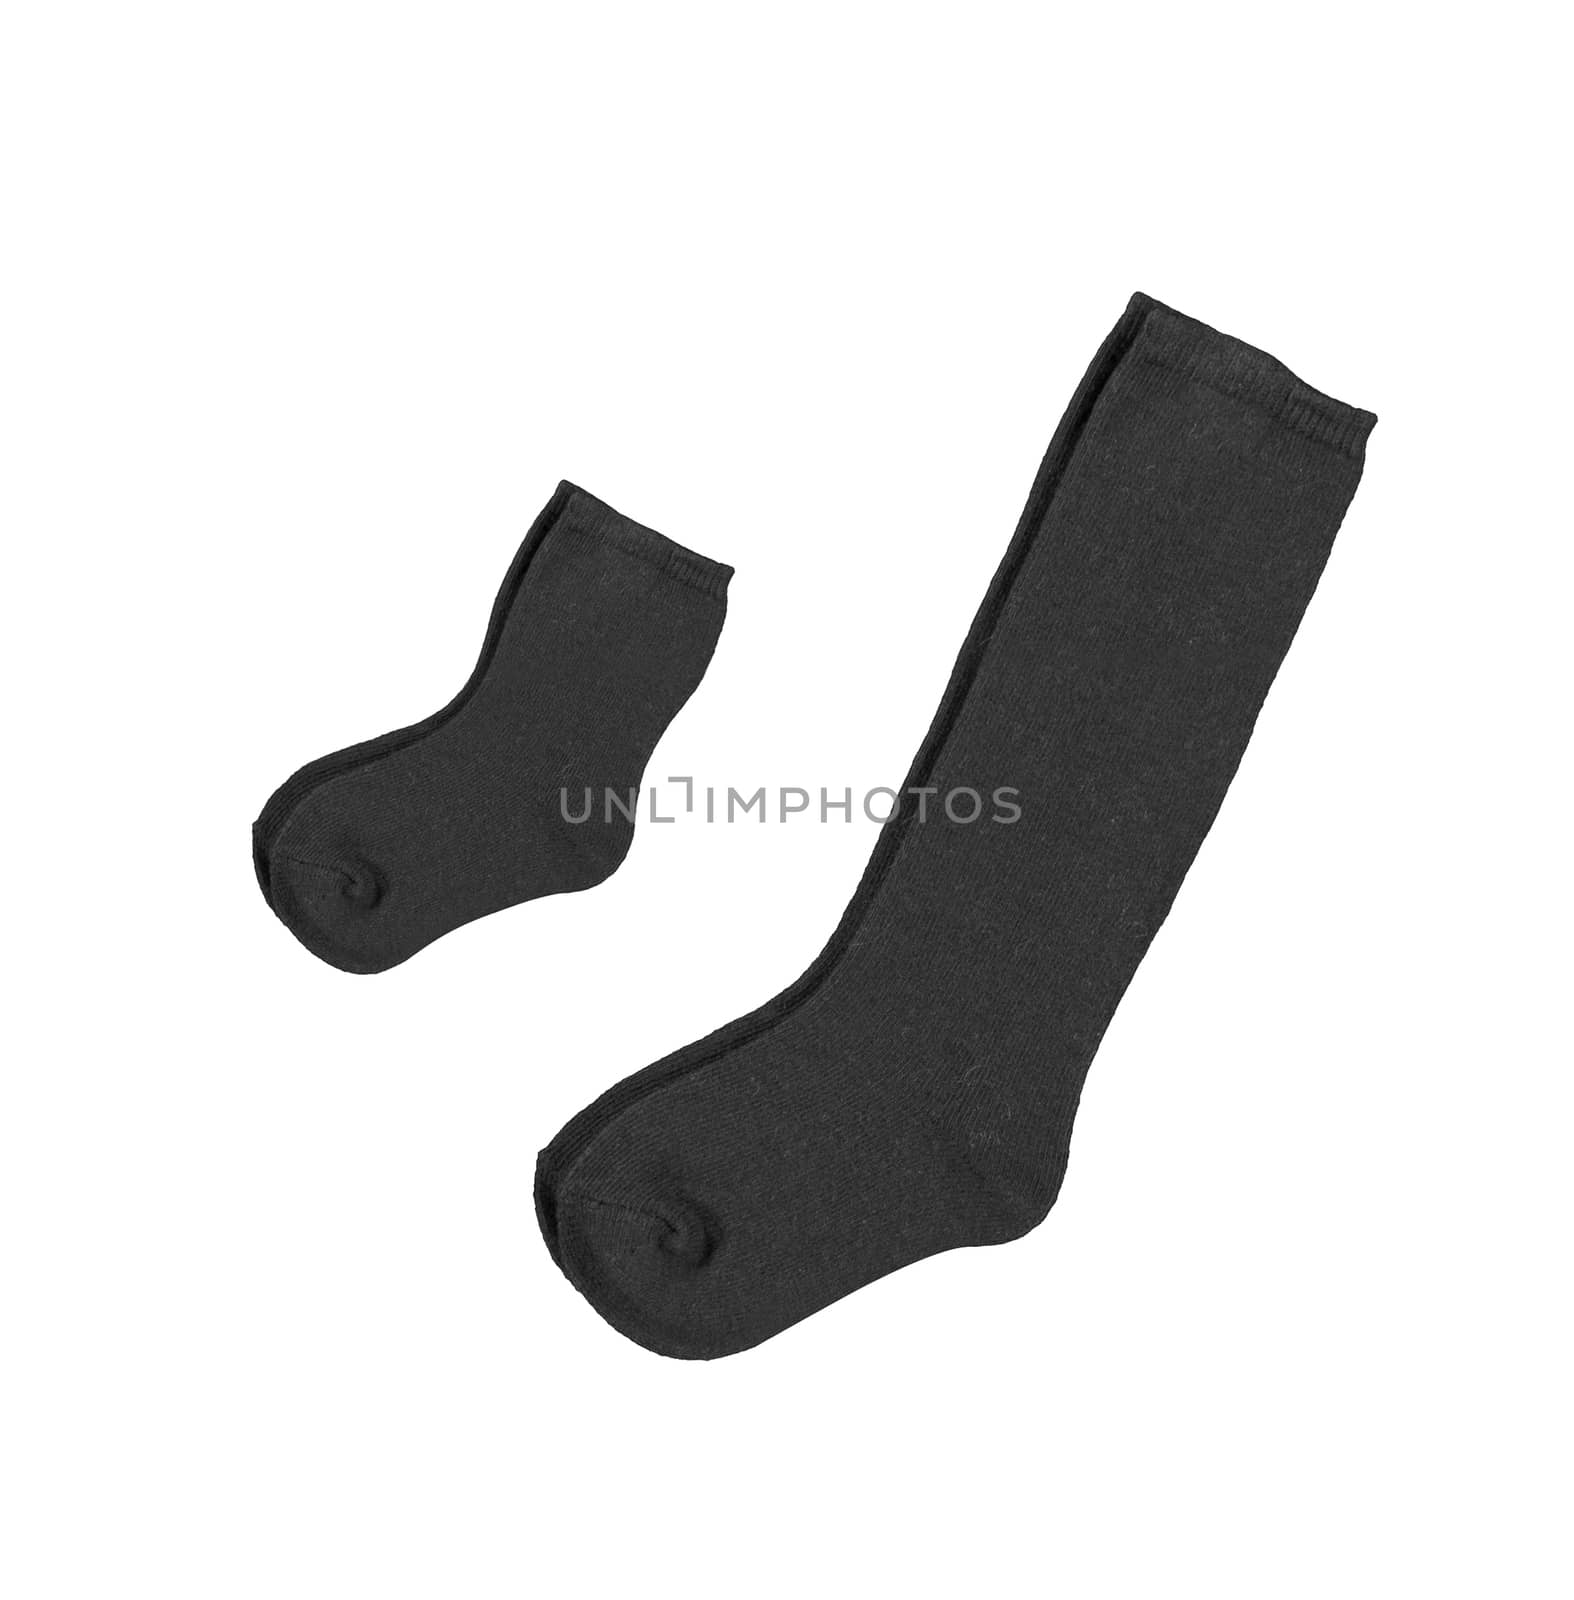 socks isolated on a white background